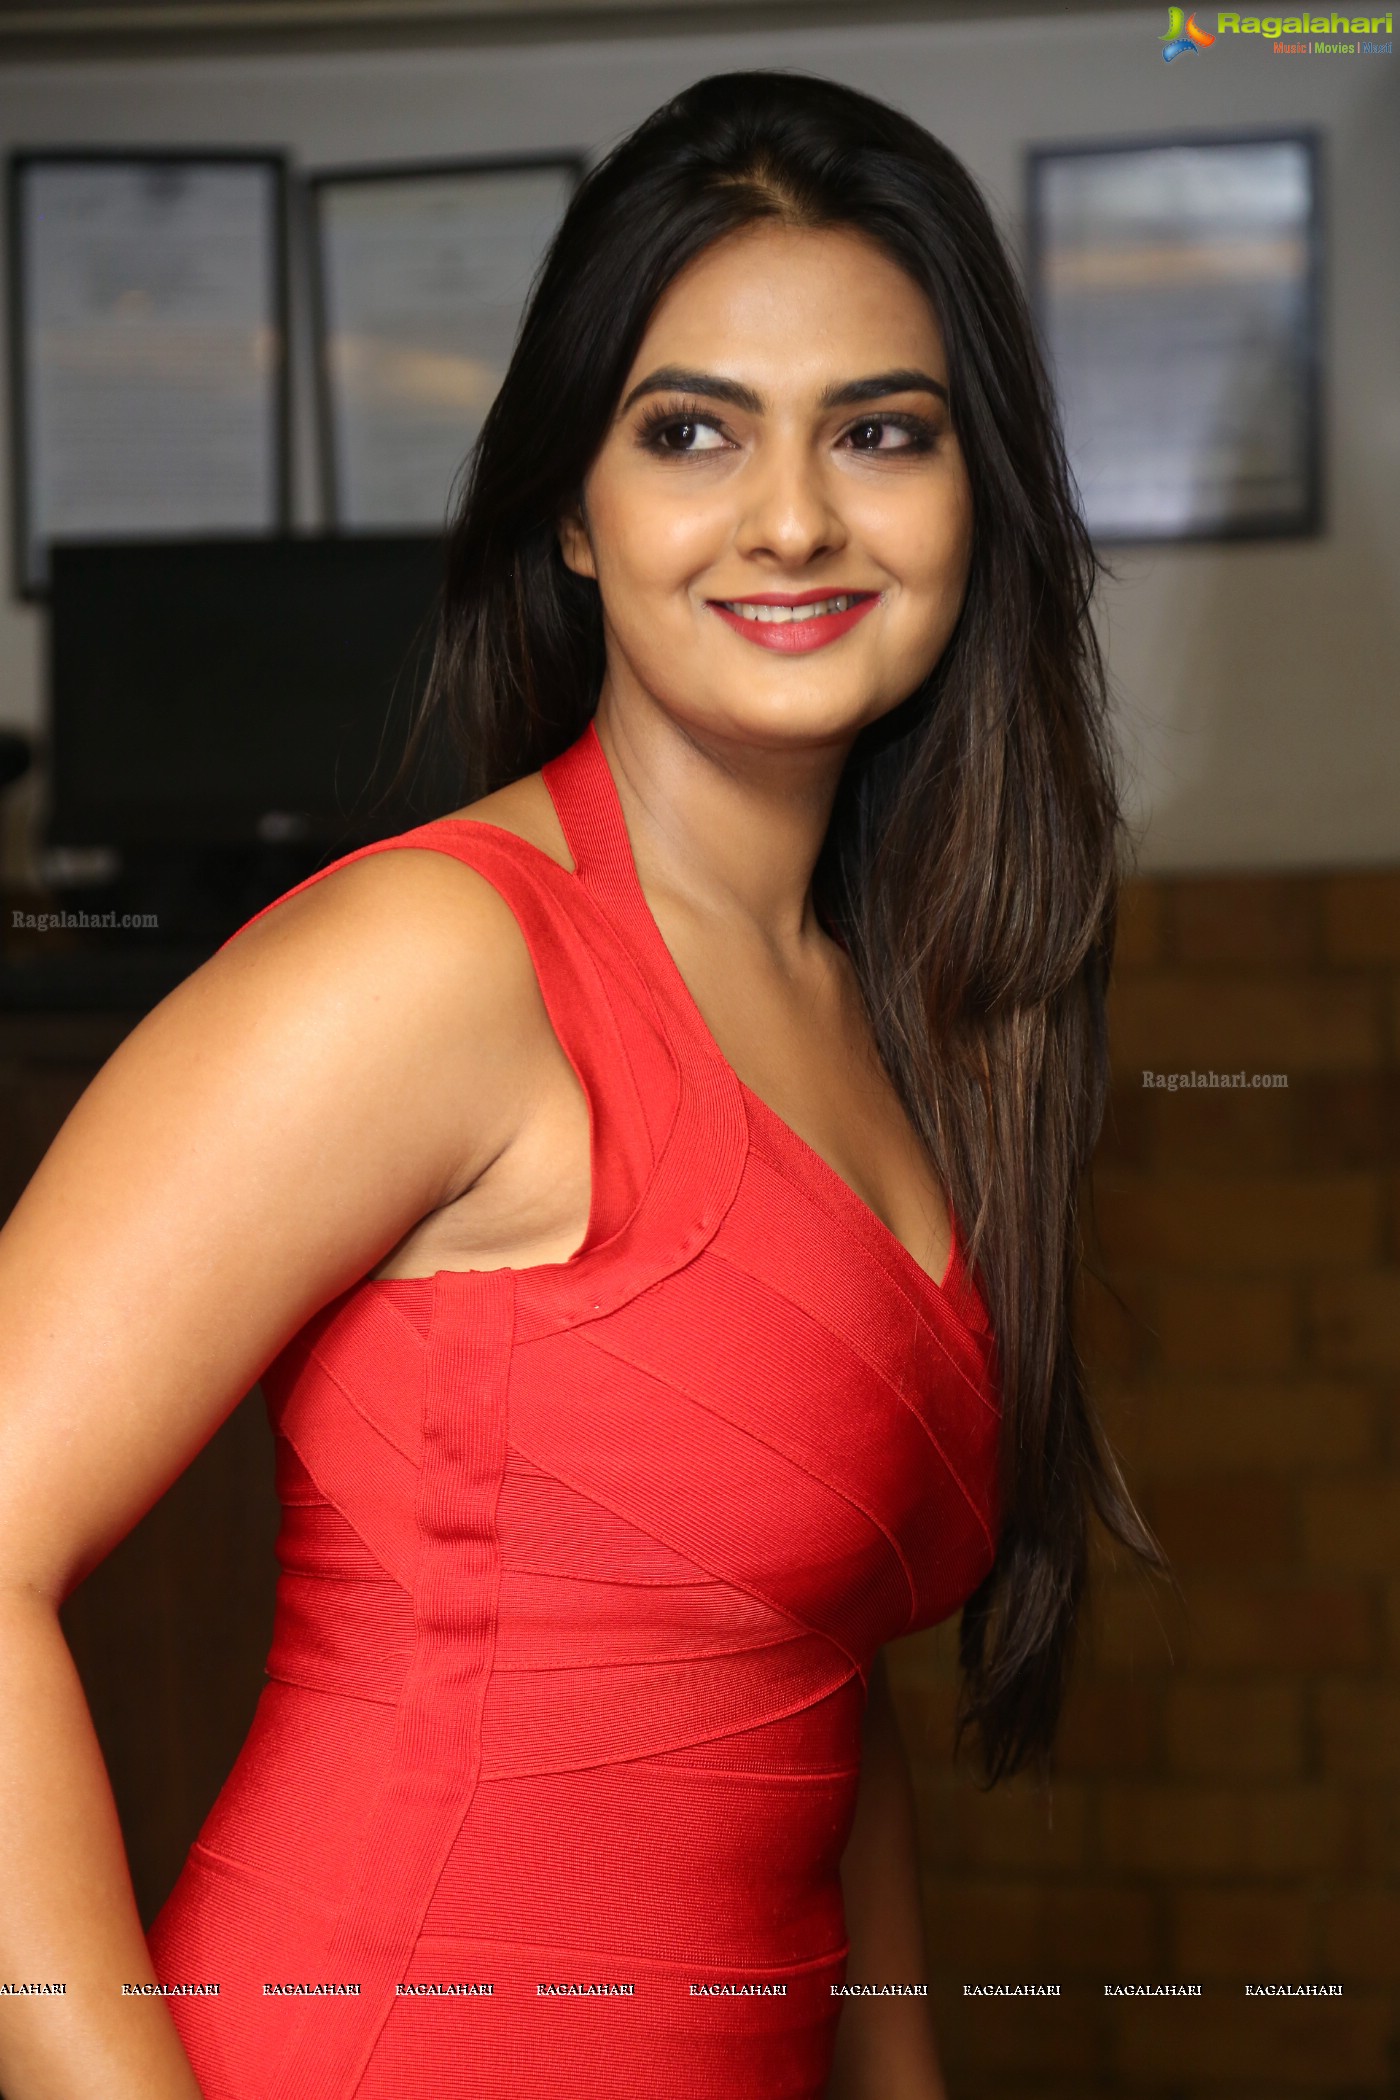 Neha Deshpande at Barbeque Nation Cake Mixing Ceremony (Posters)